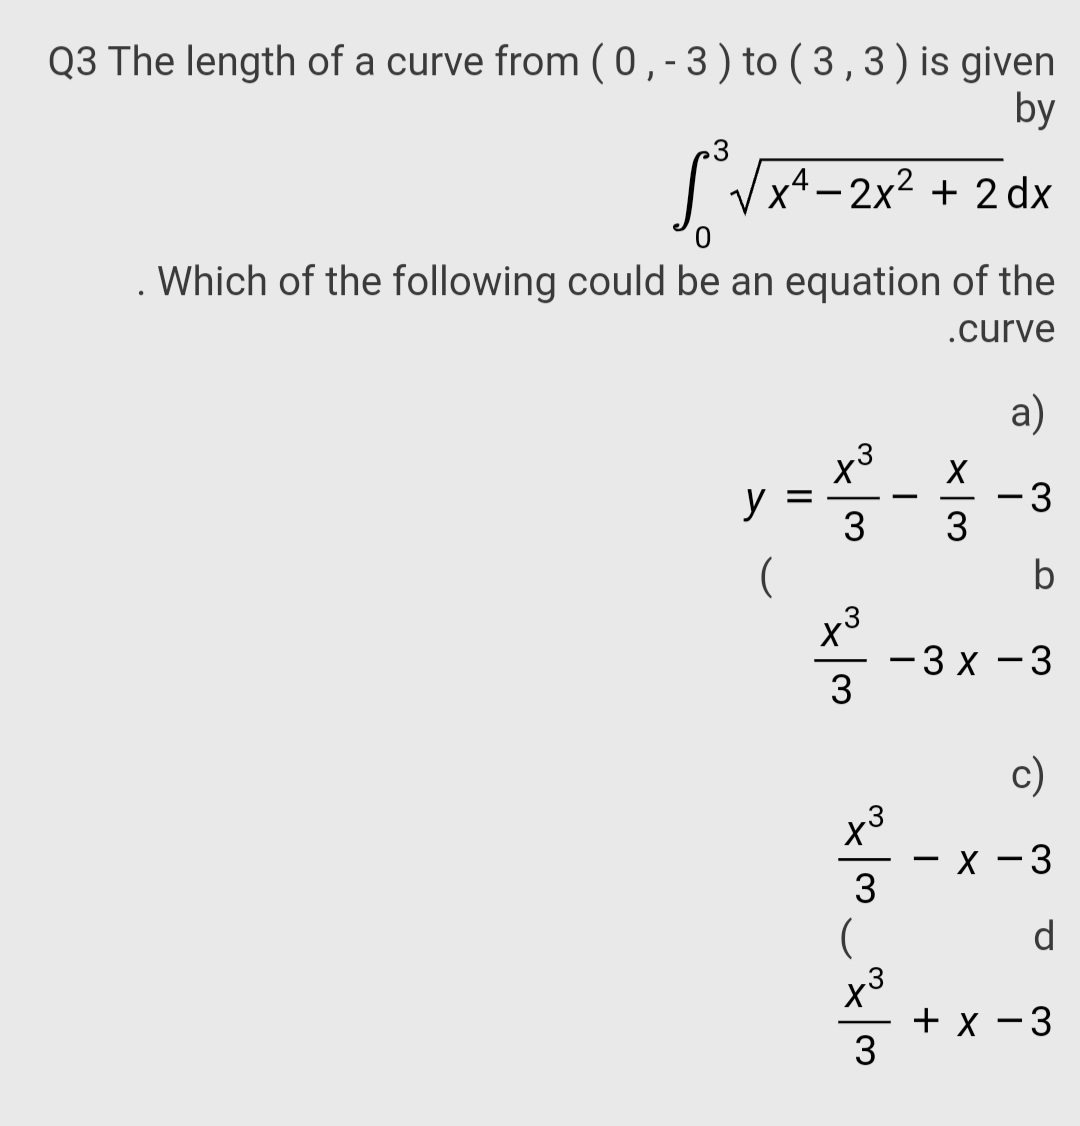 Q3 The length of a curve from (0,-3) to ( 3,3)is given
by
Vx4 - 2x2 + 2 dx
Which of the following could be an equation of the
.curve
a)
y3
y
-3
3
-
3
(
b
- 3 x - 3
3
c)
– x -3
3
(
d
to
x3
+ x - 3
3
